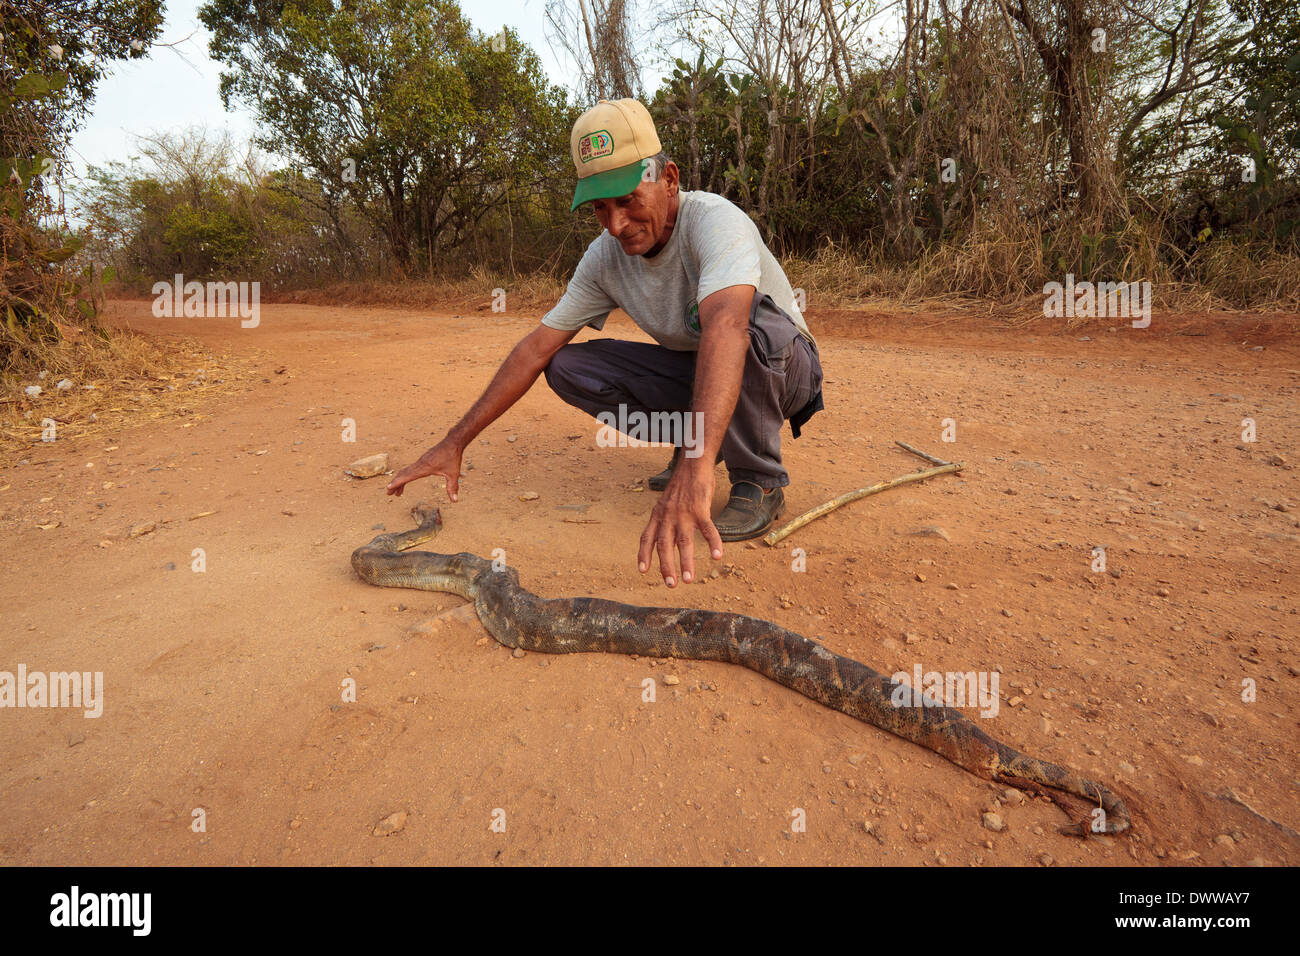 Panamanian man with a road-killed Boa Constrictor in Sarigua national park, Herrera province, Republic of Panama. Stock Photo